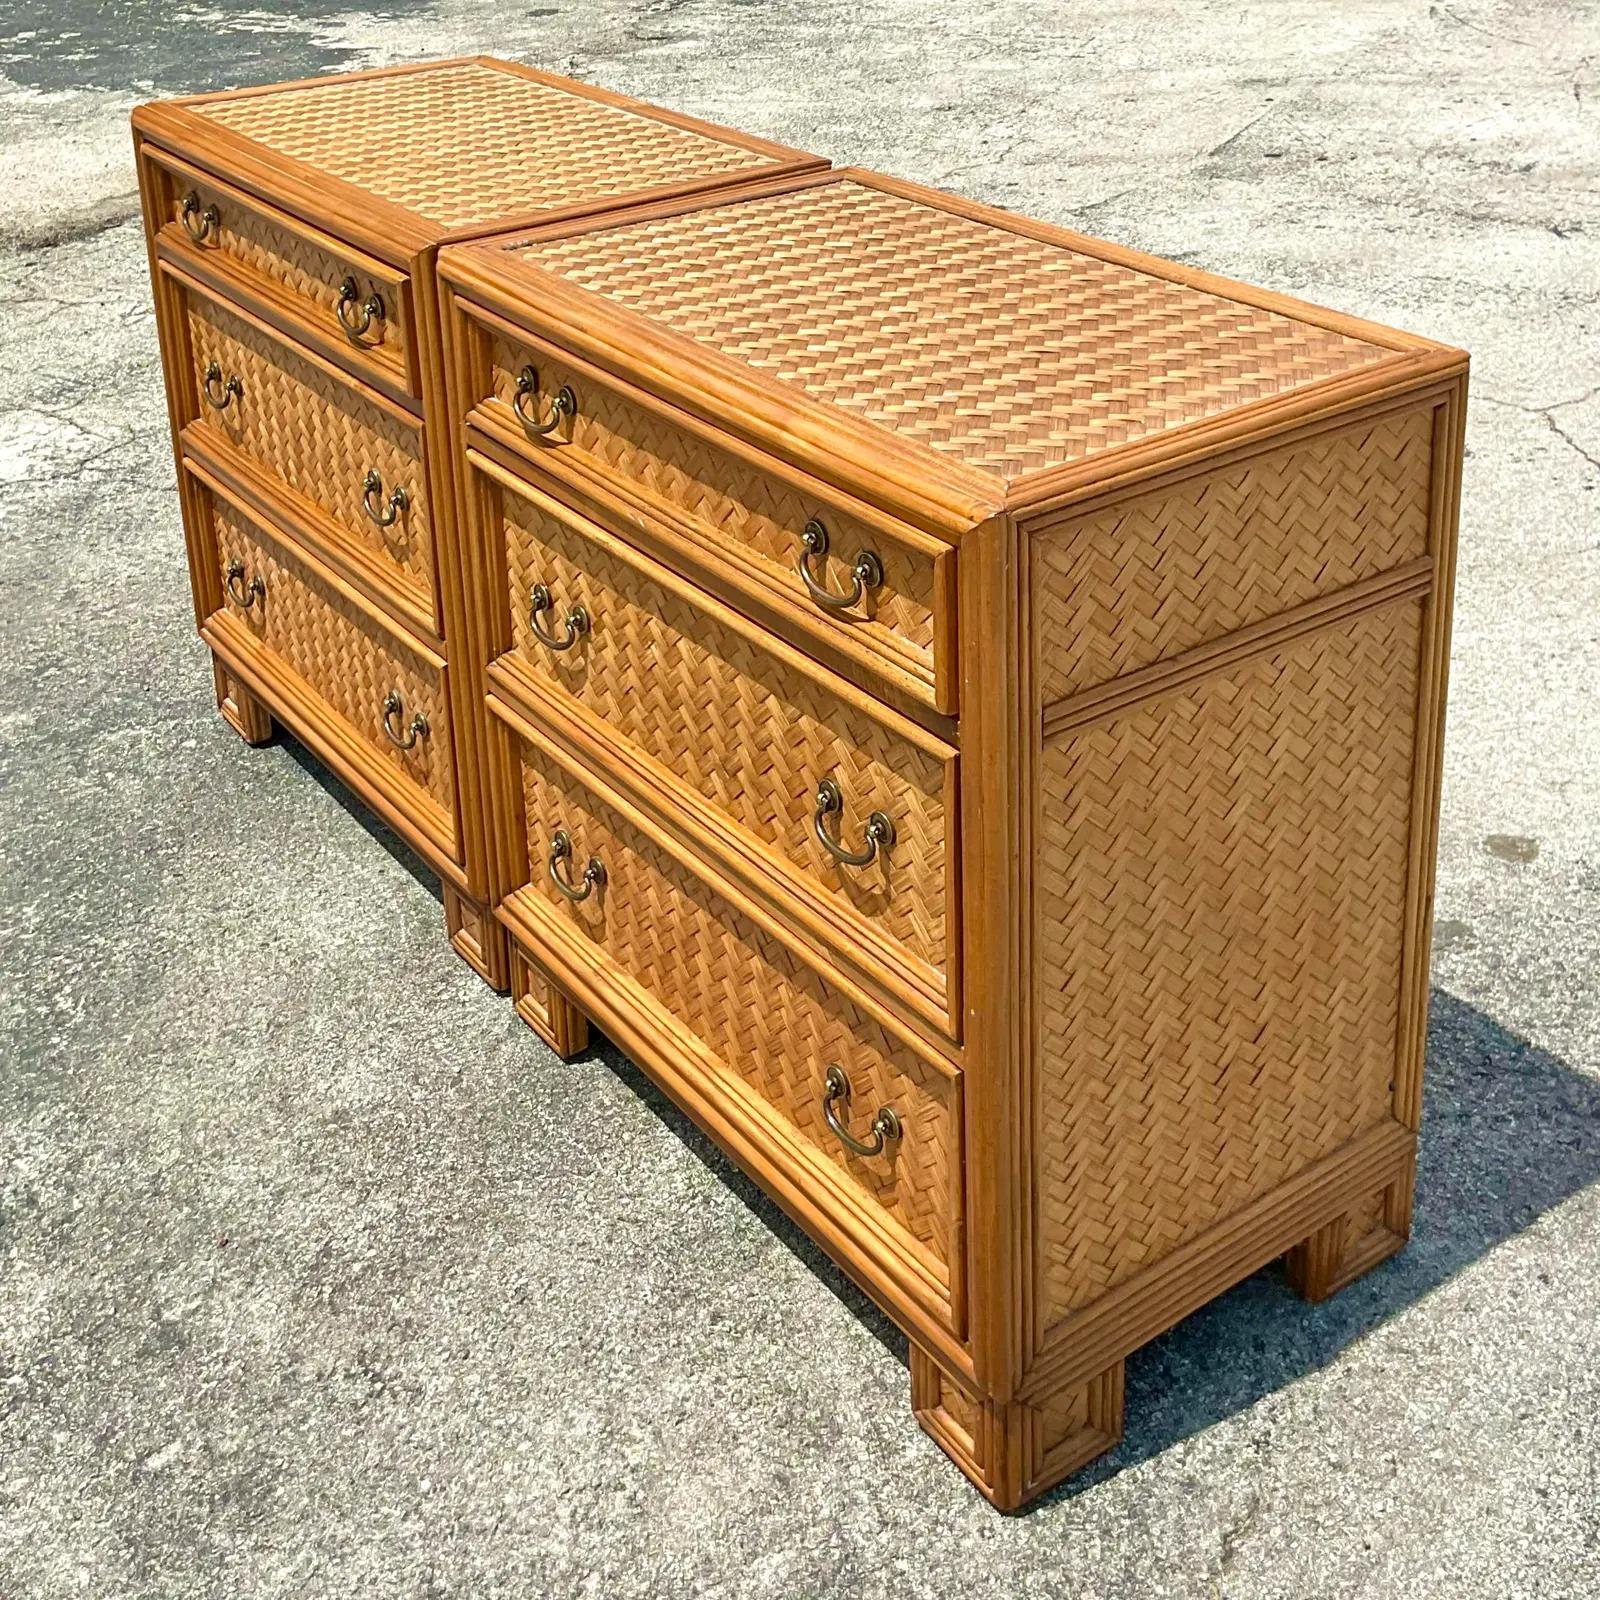 Philippine Vintage Coastal Woven Rattan Chest of Drawers, a Pair